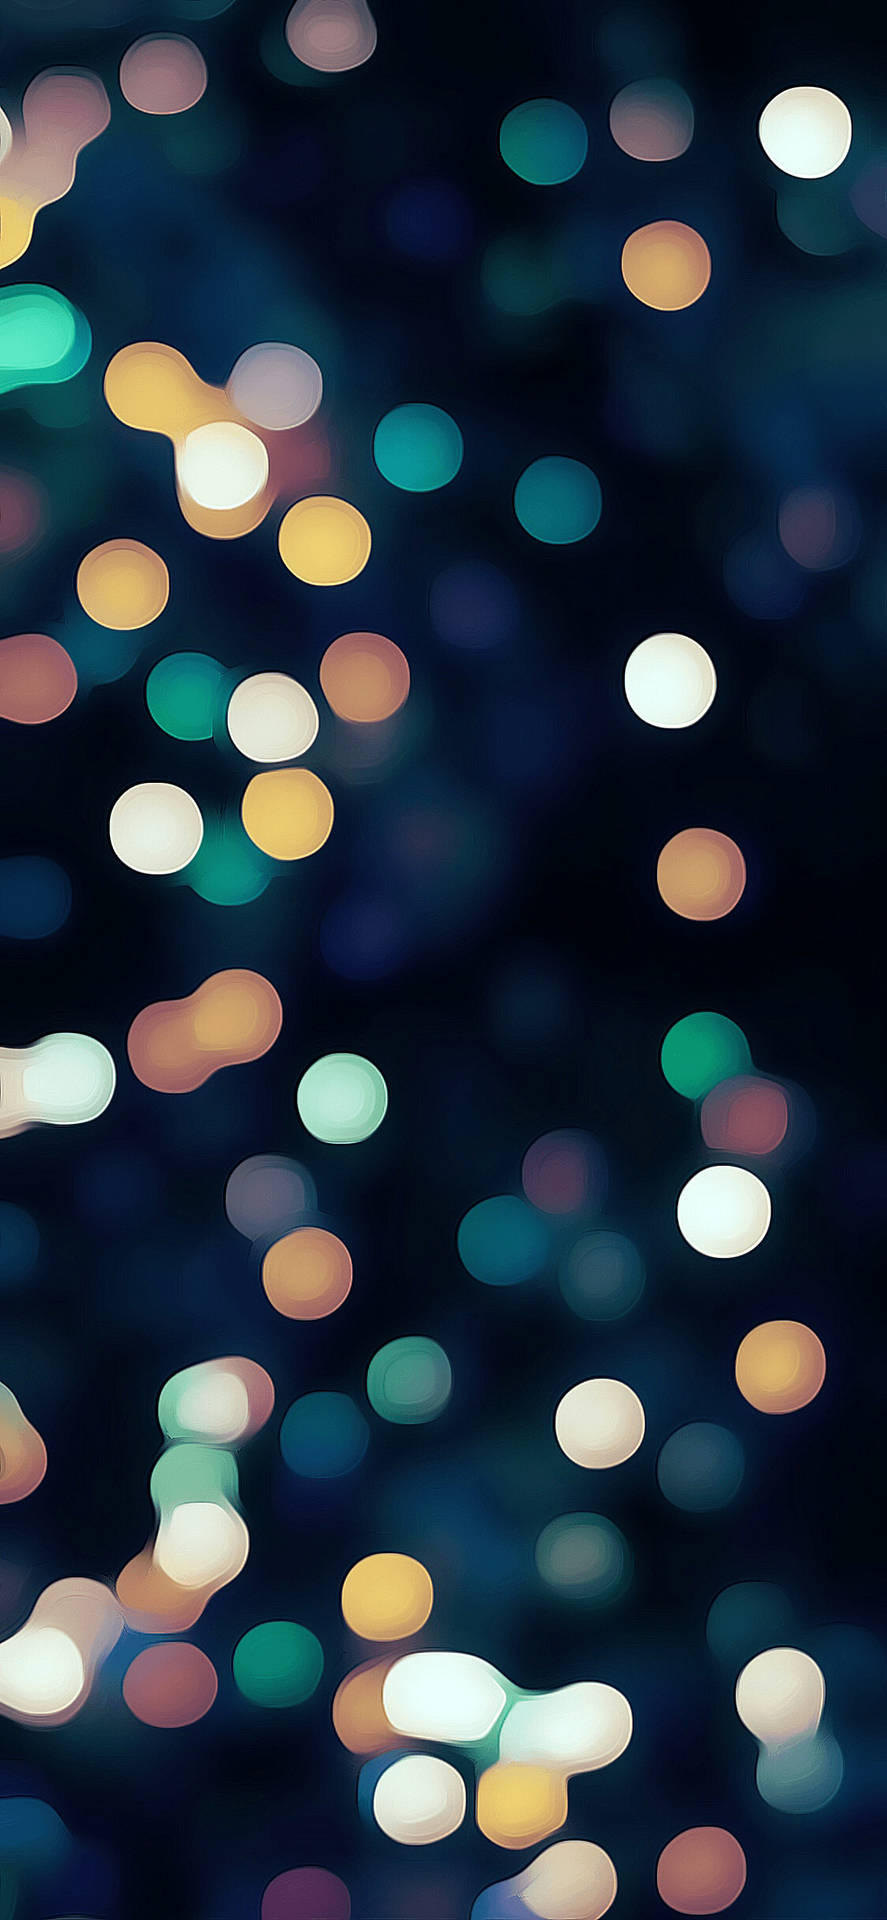 Capture the Christmas Magic this Year on your iPhone Wallpaper